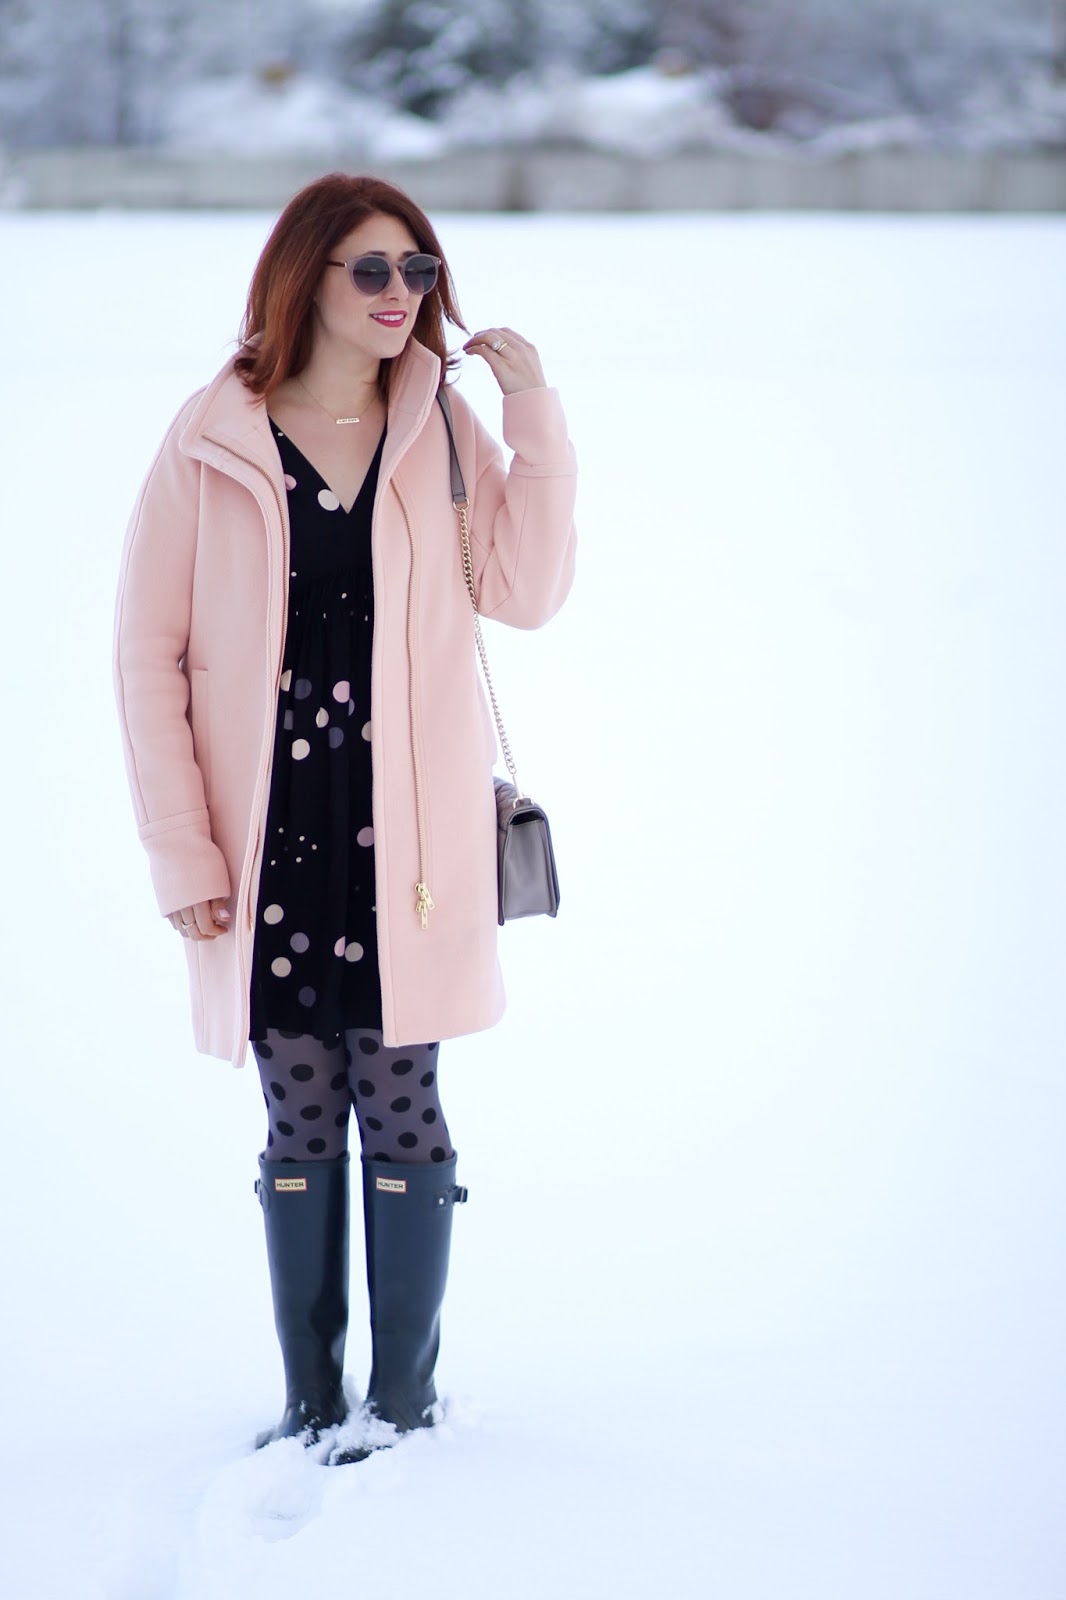 anthropologie felicity dress, polka dot tights, cocoon coat in pale ginger, red hair and navy hunter boots make a casual and cute affordable outfit for work or teacher